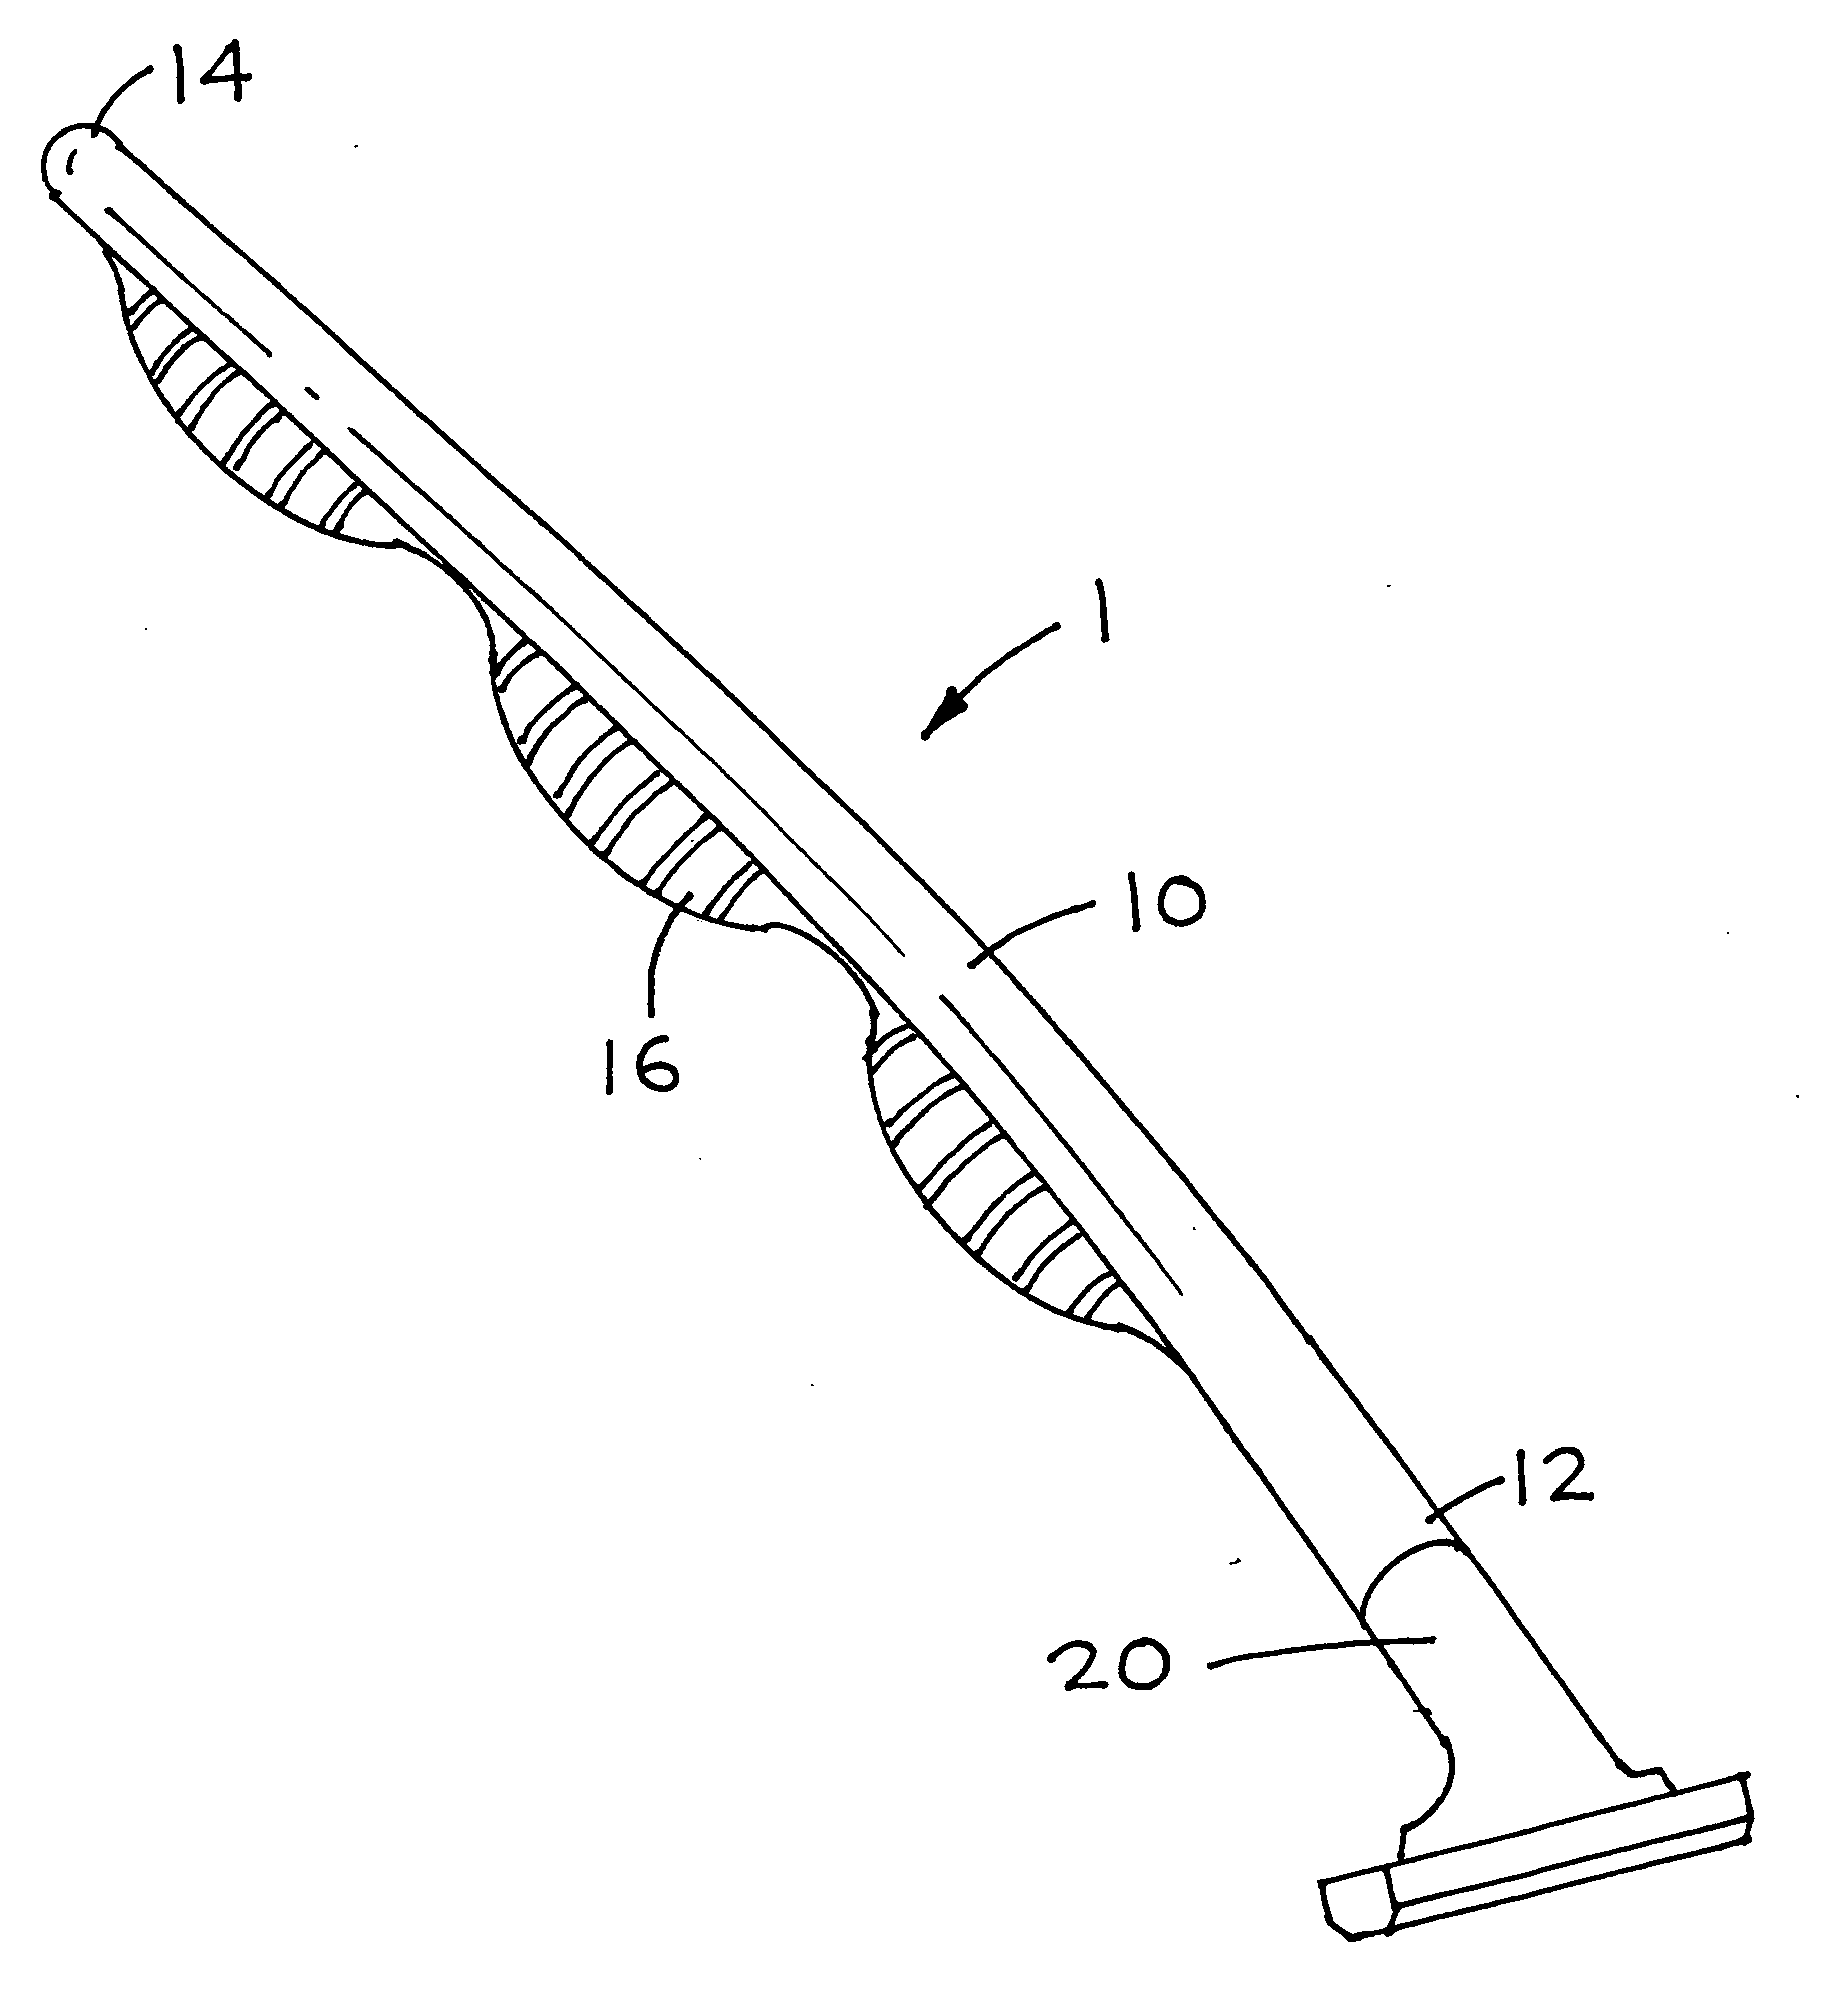 Apparatus for removing body hair